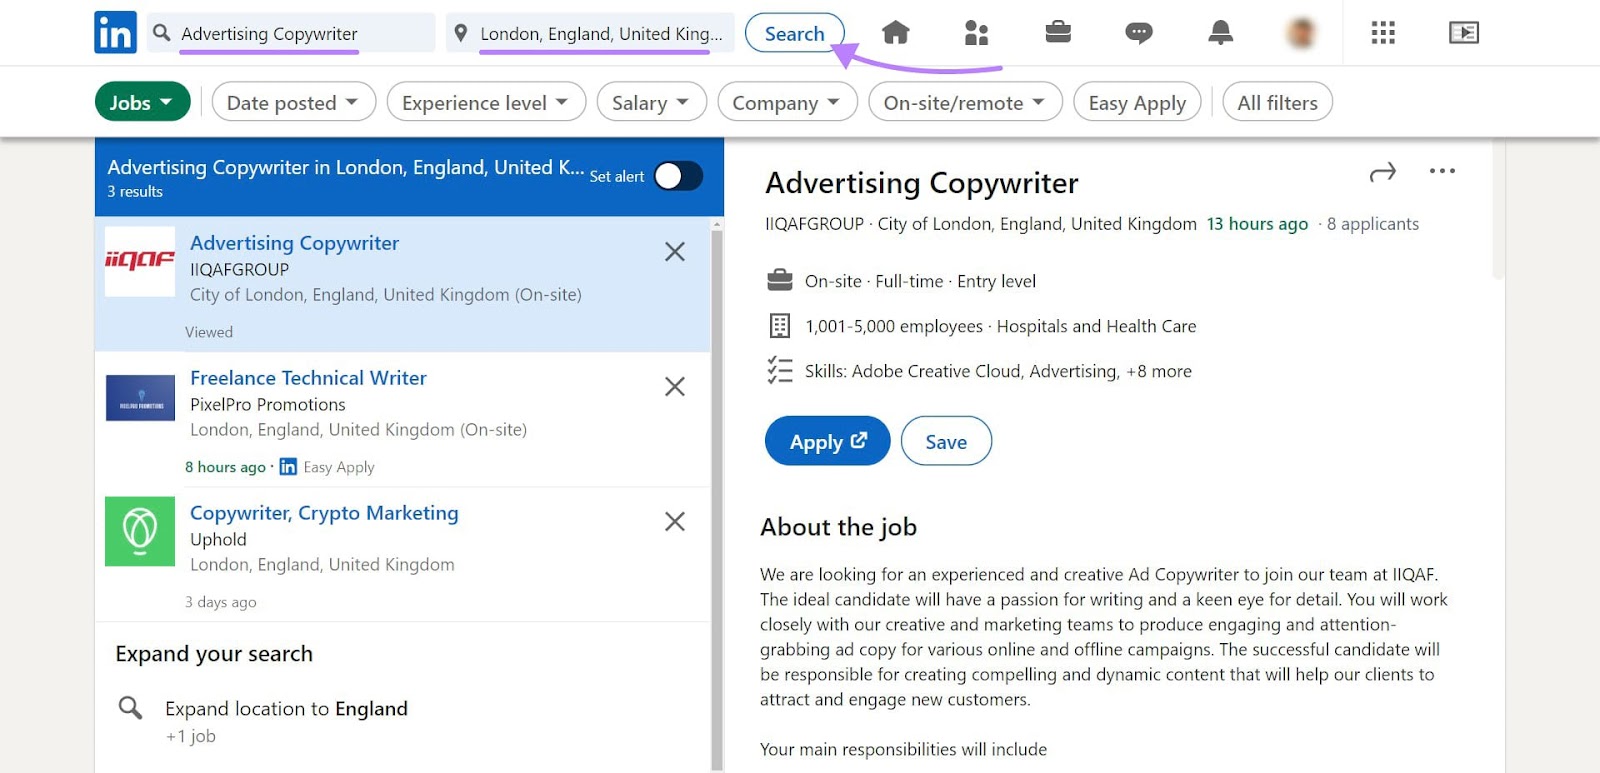 A job search for “advertising copywriter” on LinkedIn